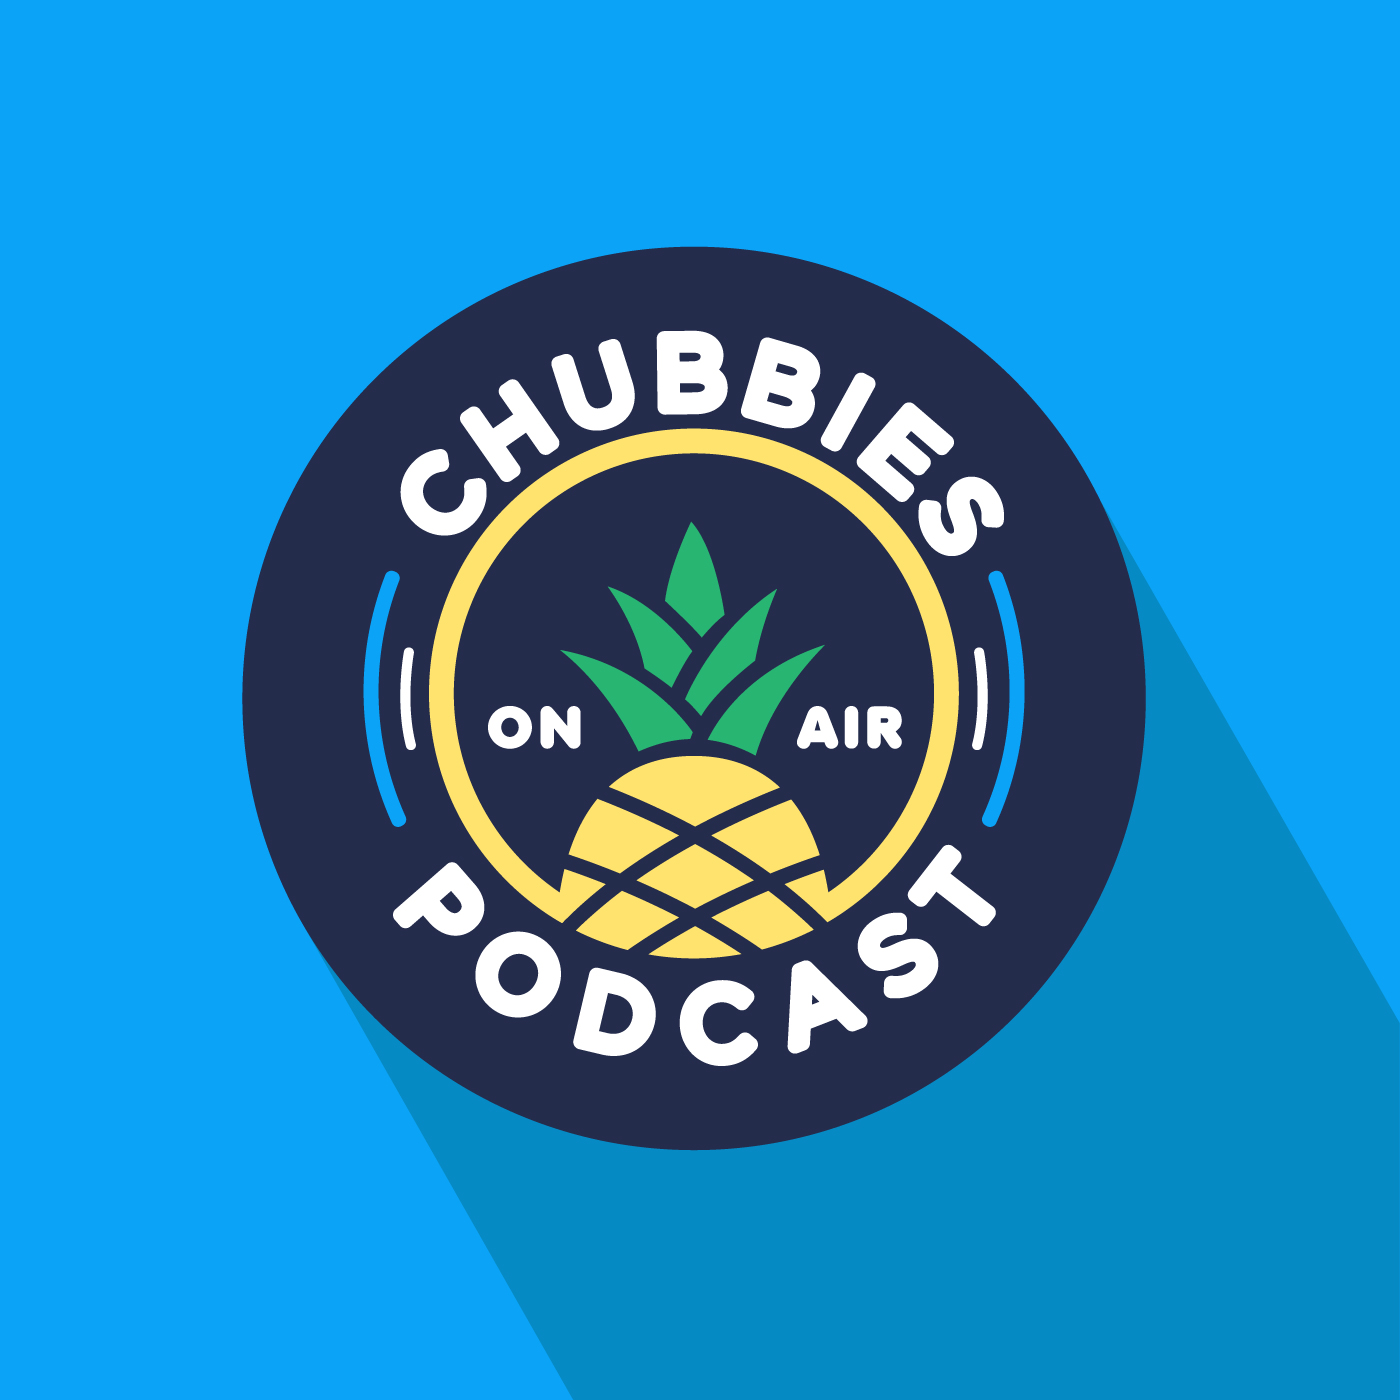 Chubbies Podcast